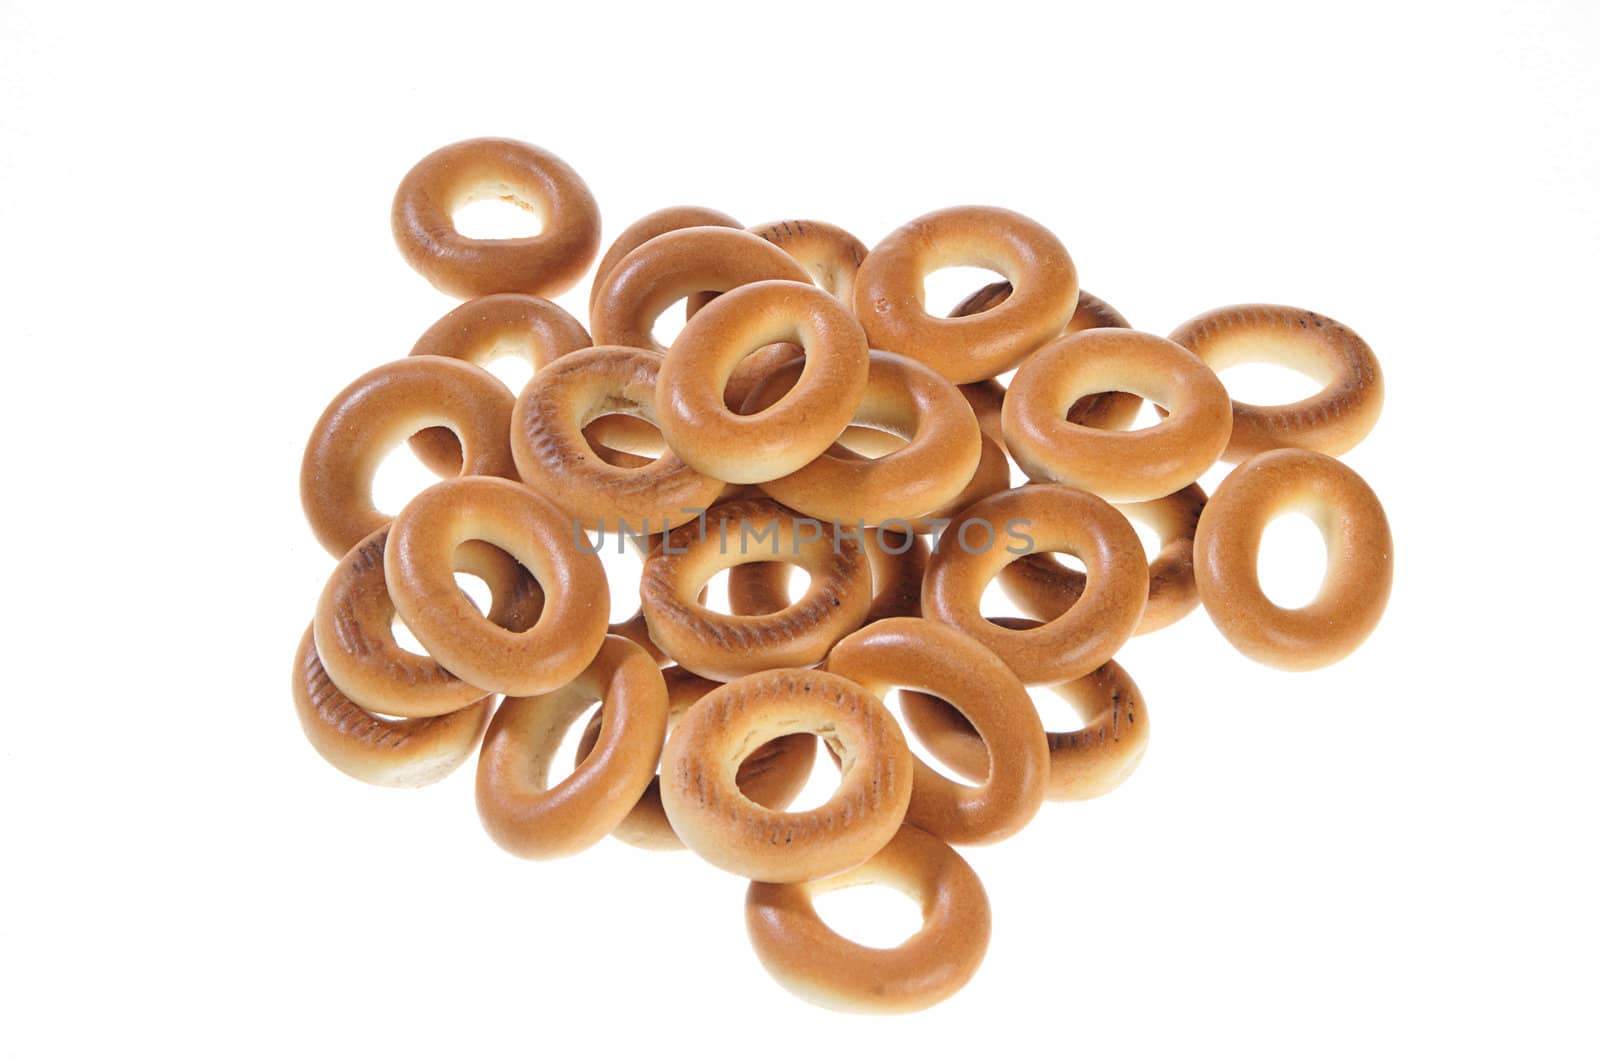 small group of bagels isolated on a white background